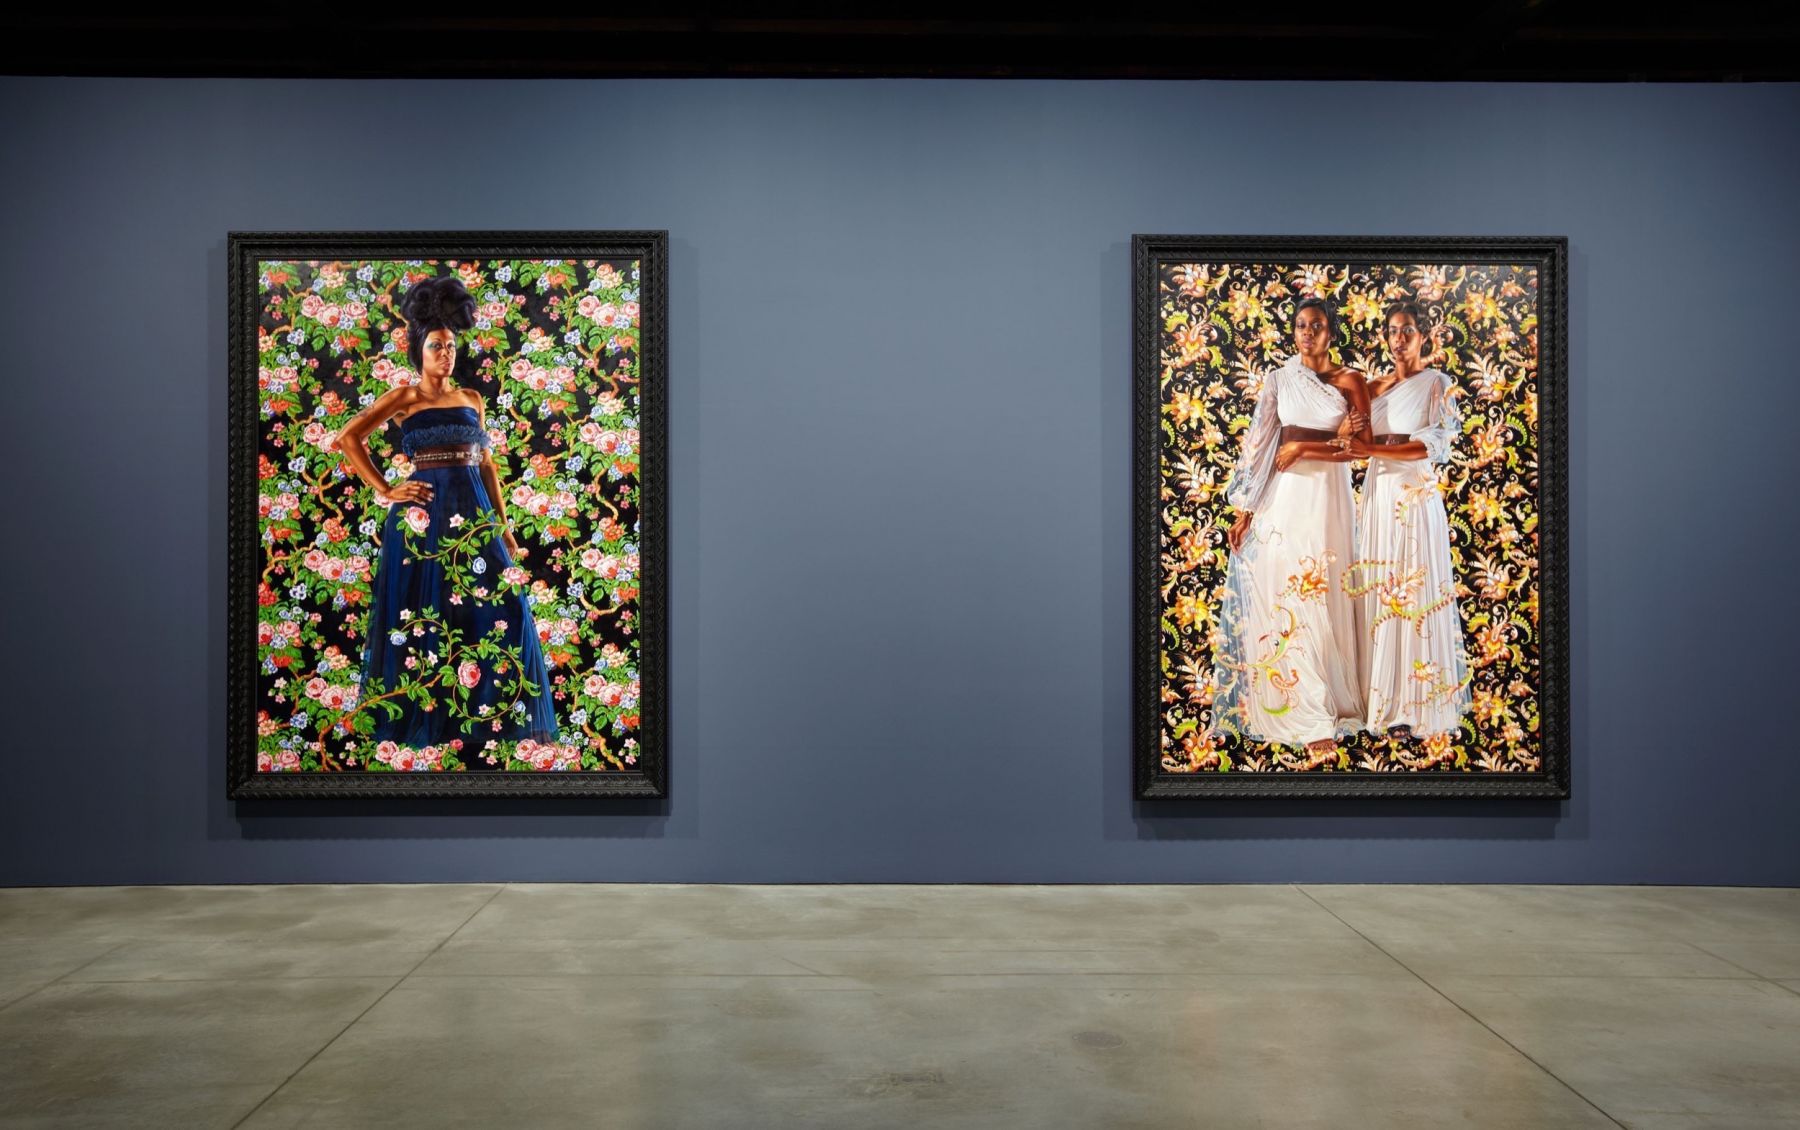 Kehinde Wiley | An Economy of Grace, Sean Kelly Gallery, New York City, USA, May 6 - June 16, 2012 | 3